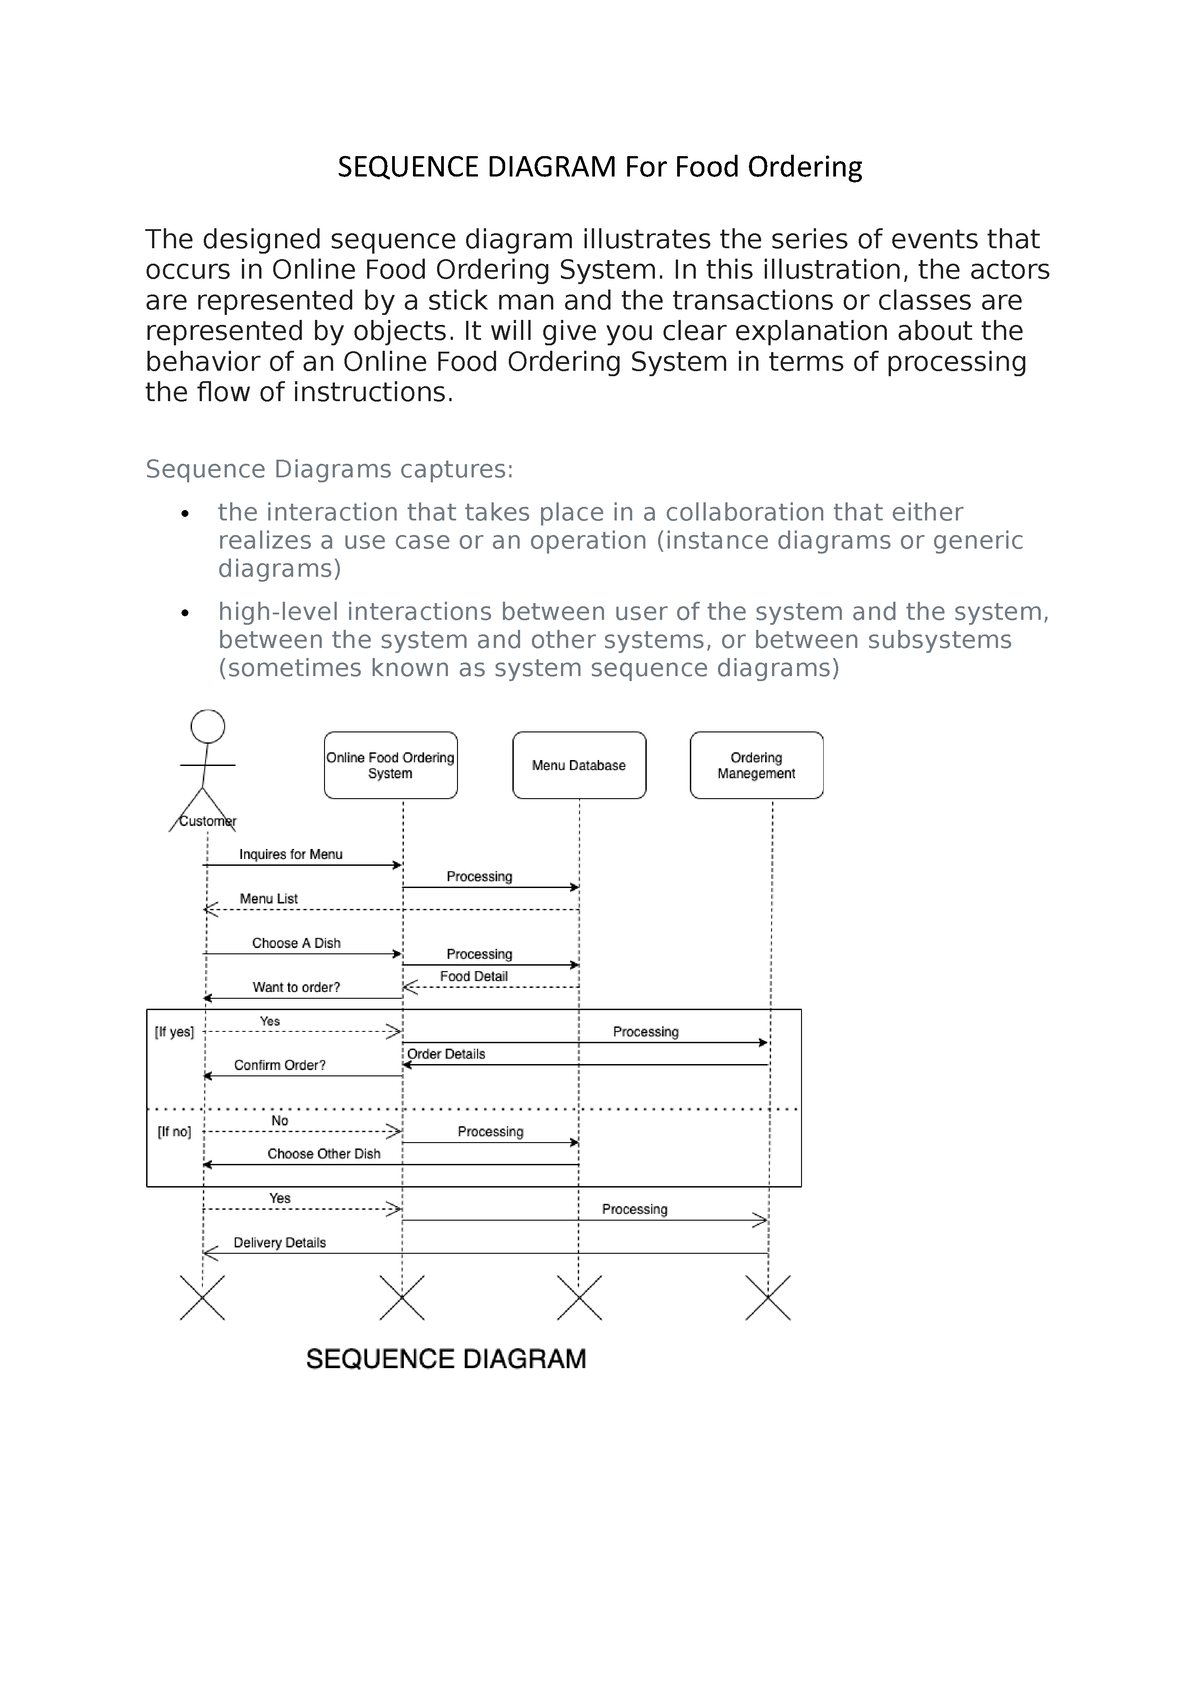 Sequence Diagram For Food Ordering Sequence Diagram For Food Ordering The Designed Sequence 8157